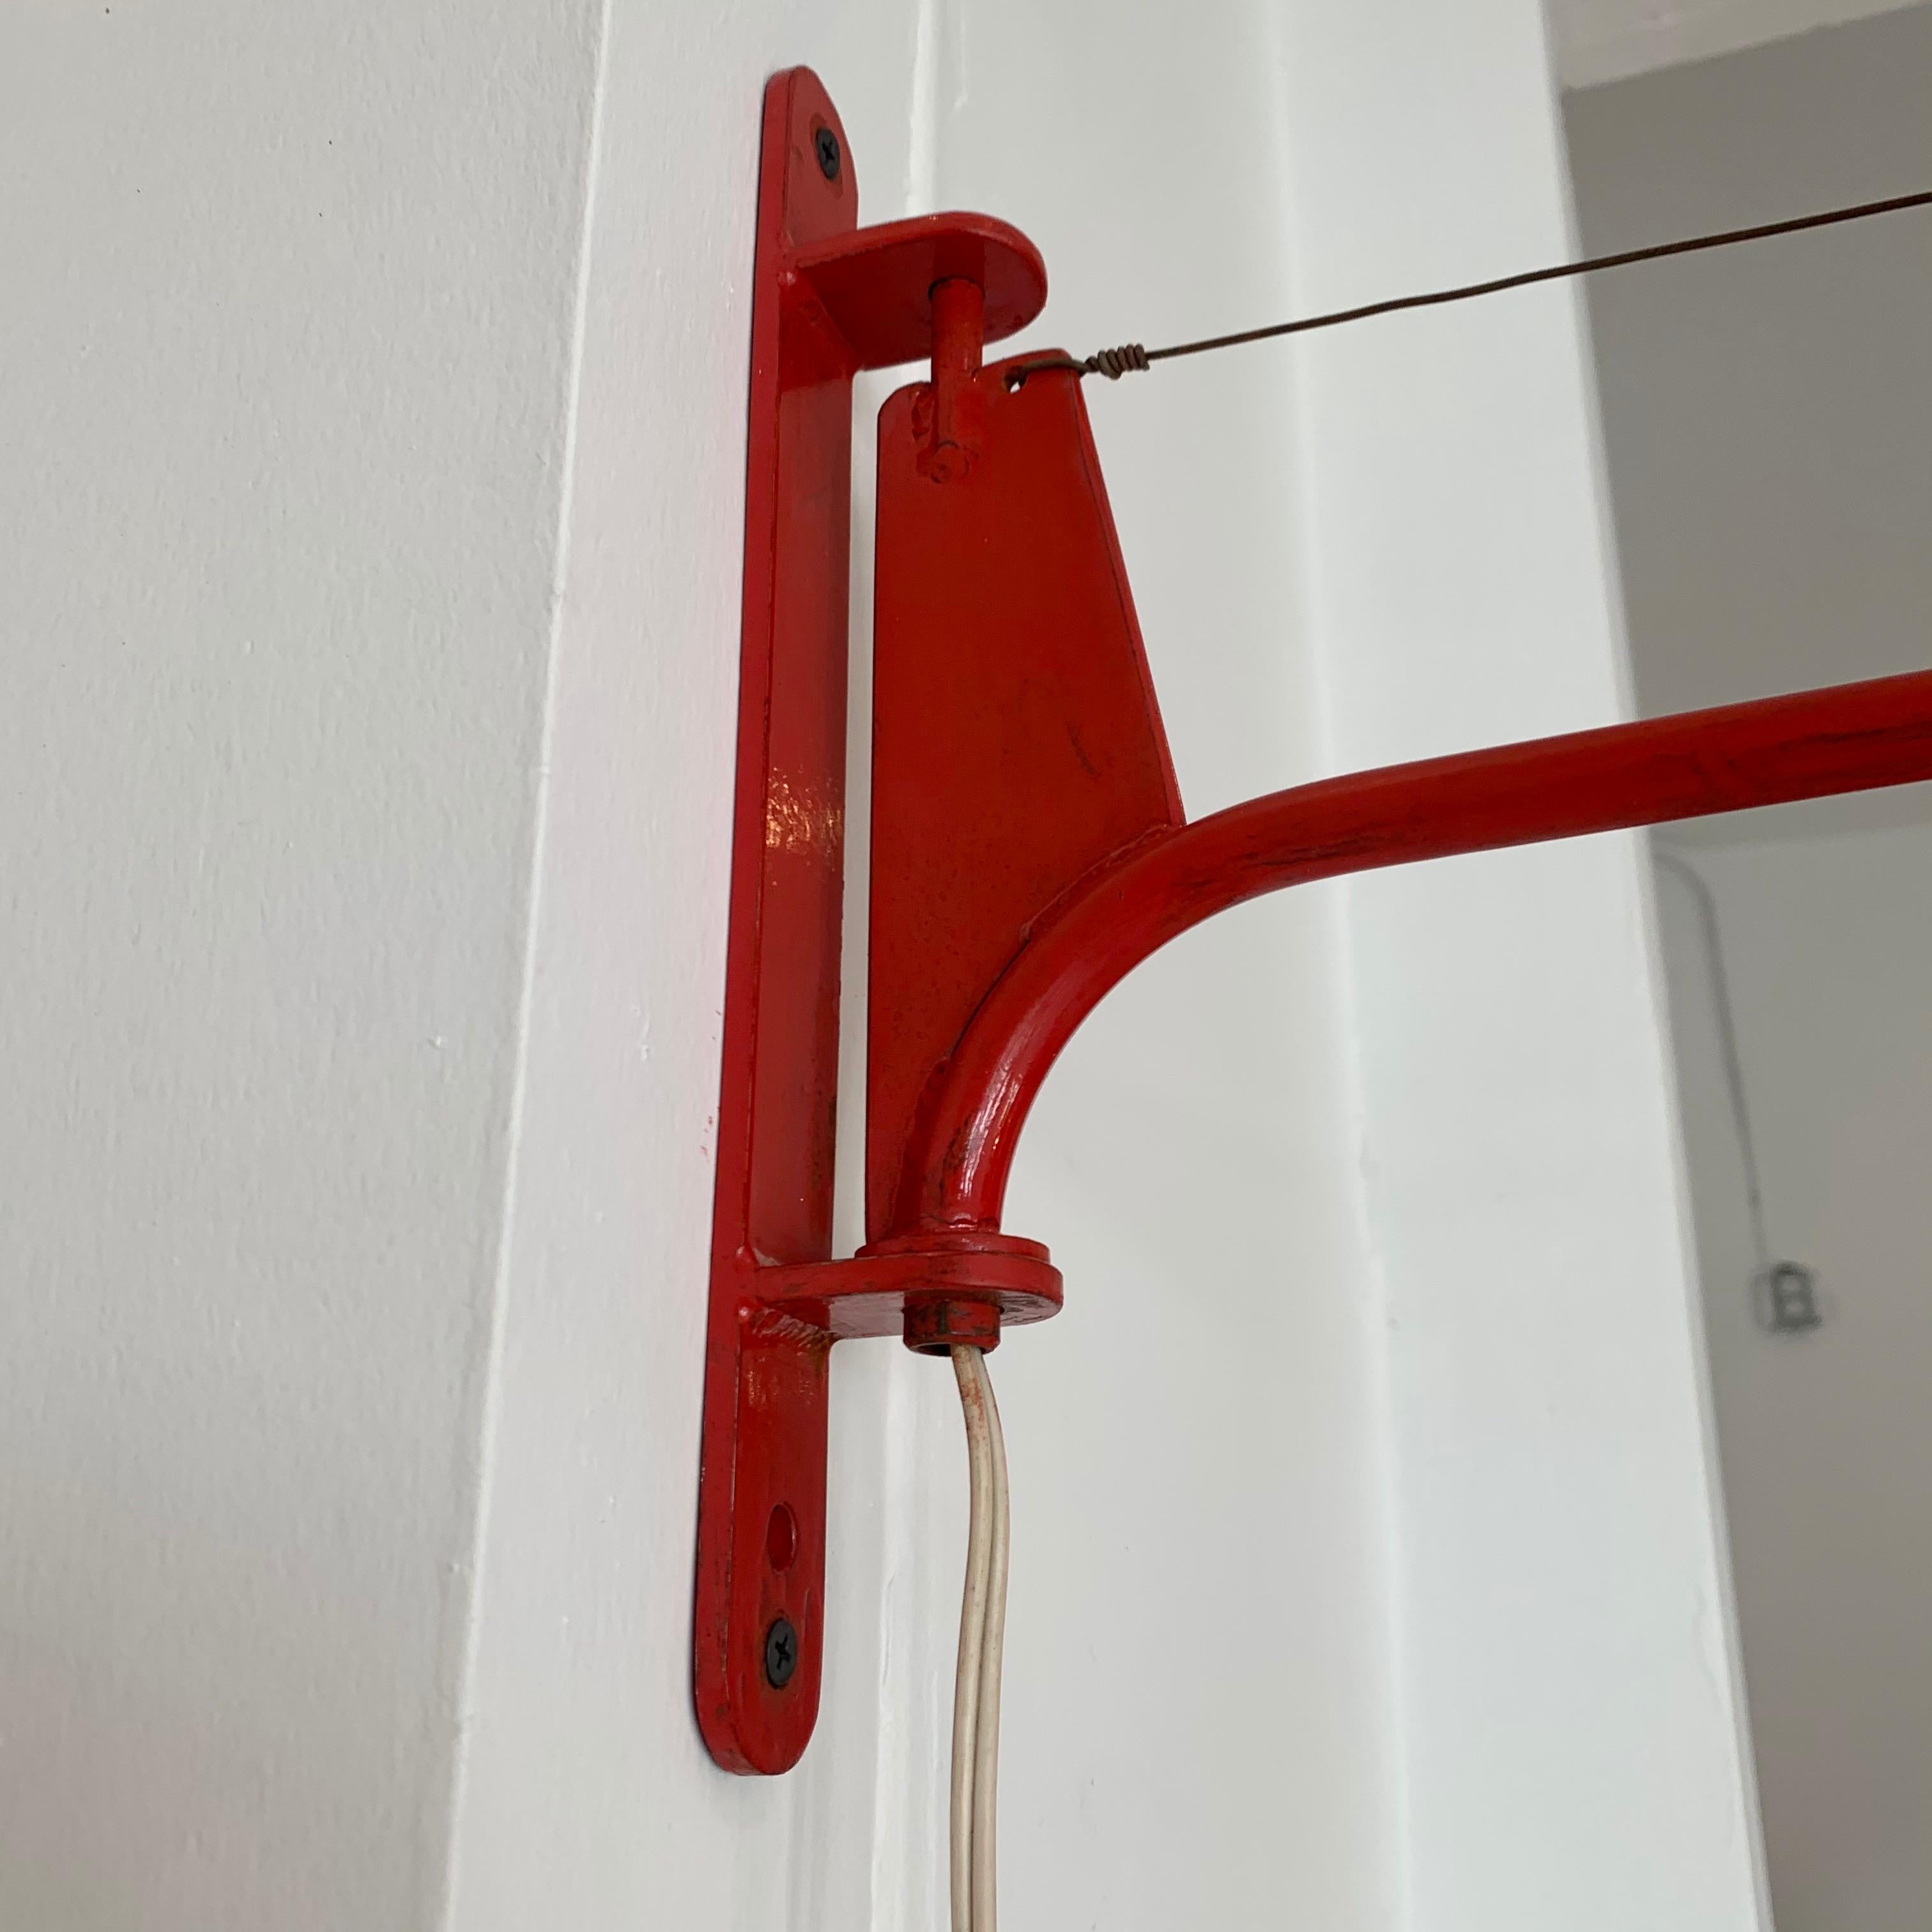 Jean Prouve Style Swing Arm Jib Sconce 2